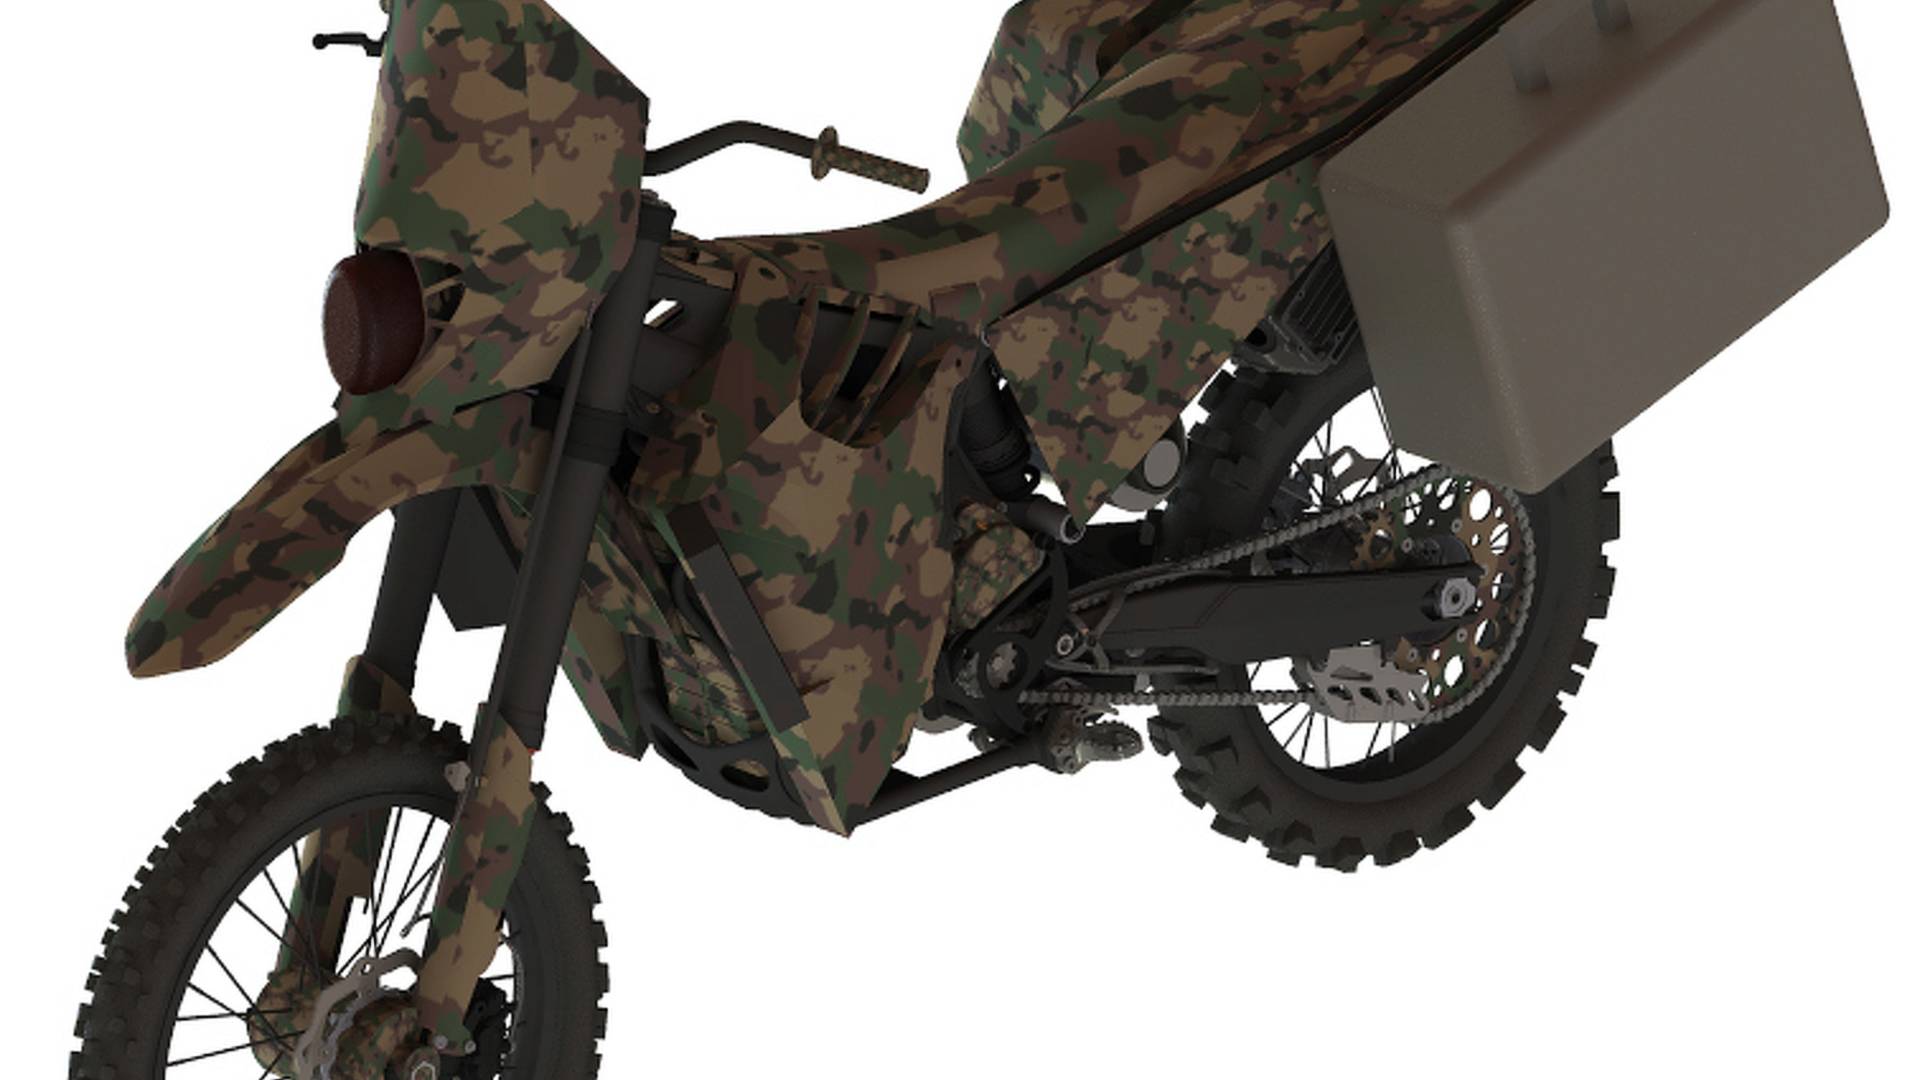 silent-hawk-a-hybrid-silent-motorcycle-for-us-special-forces